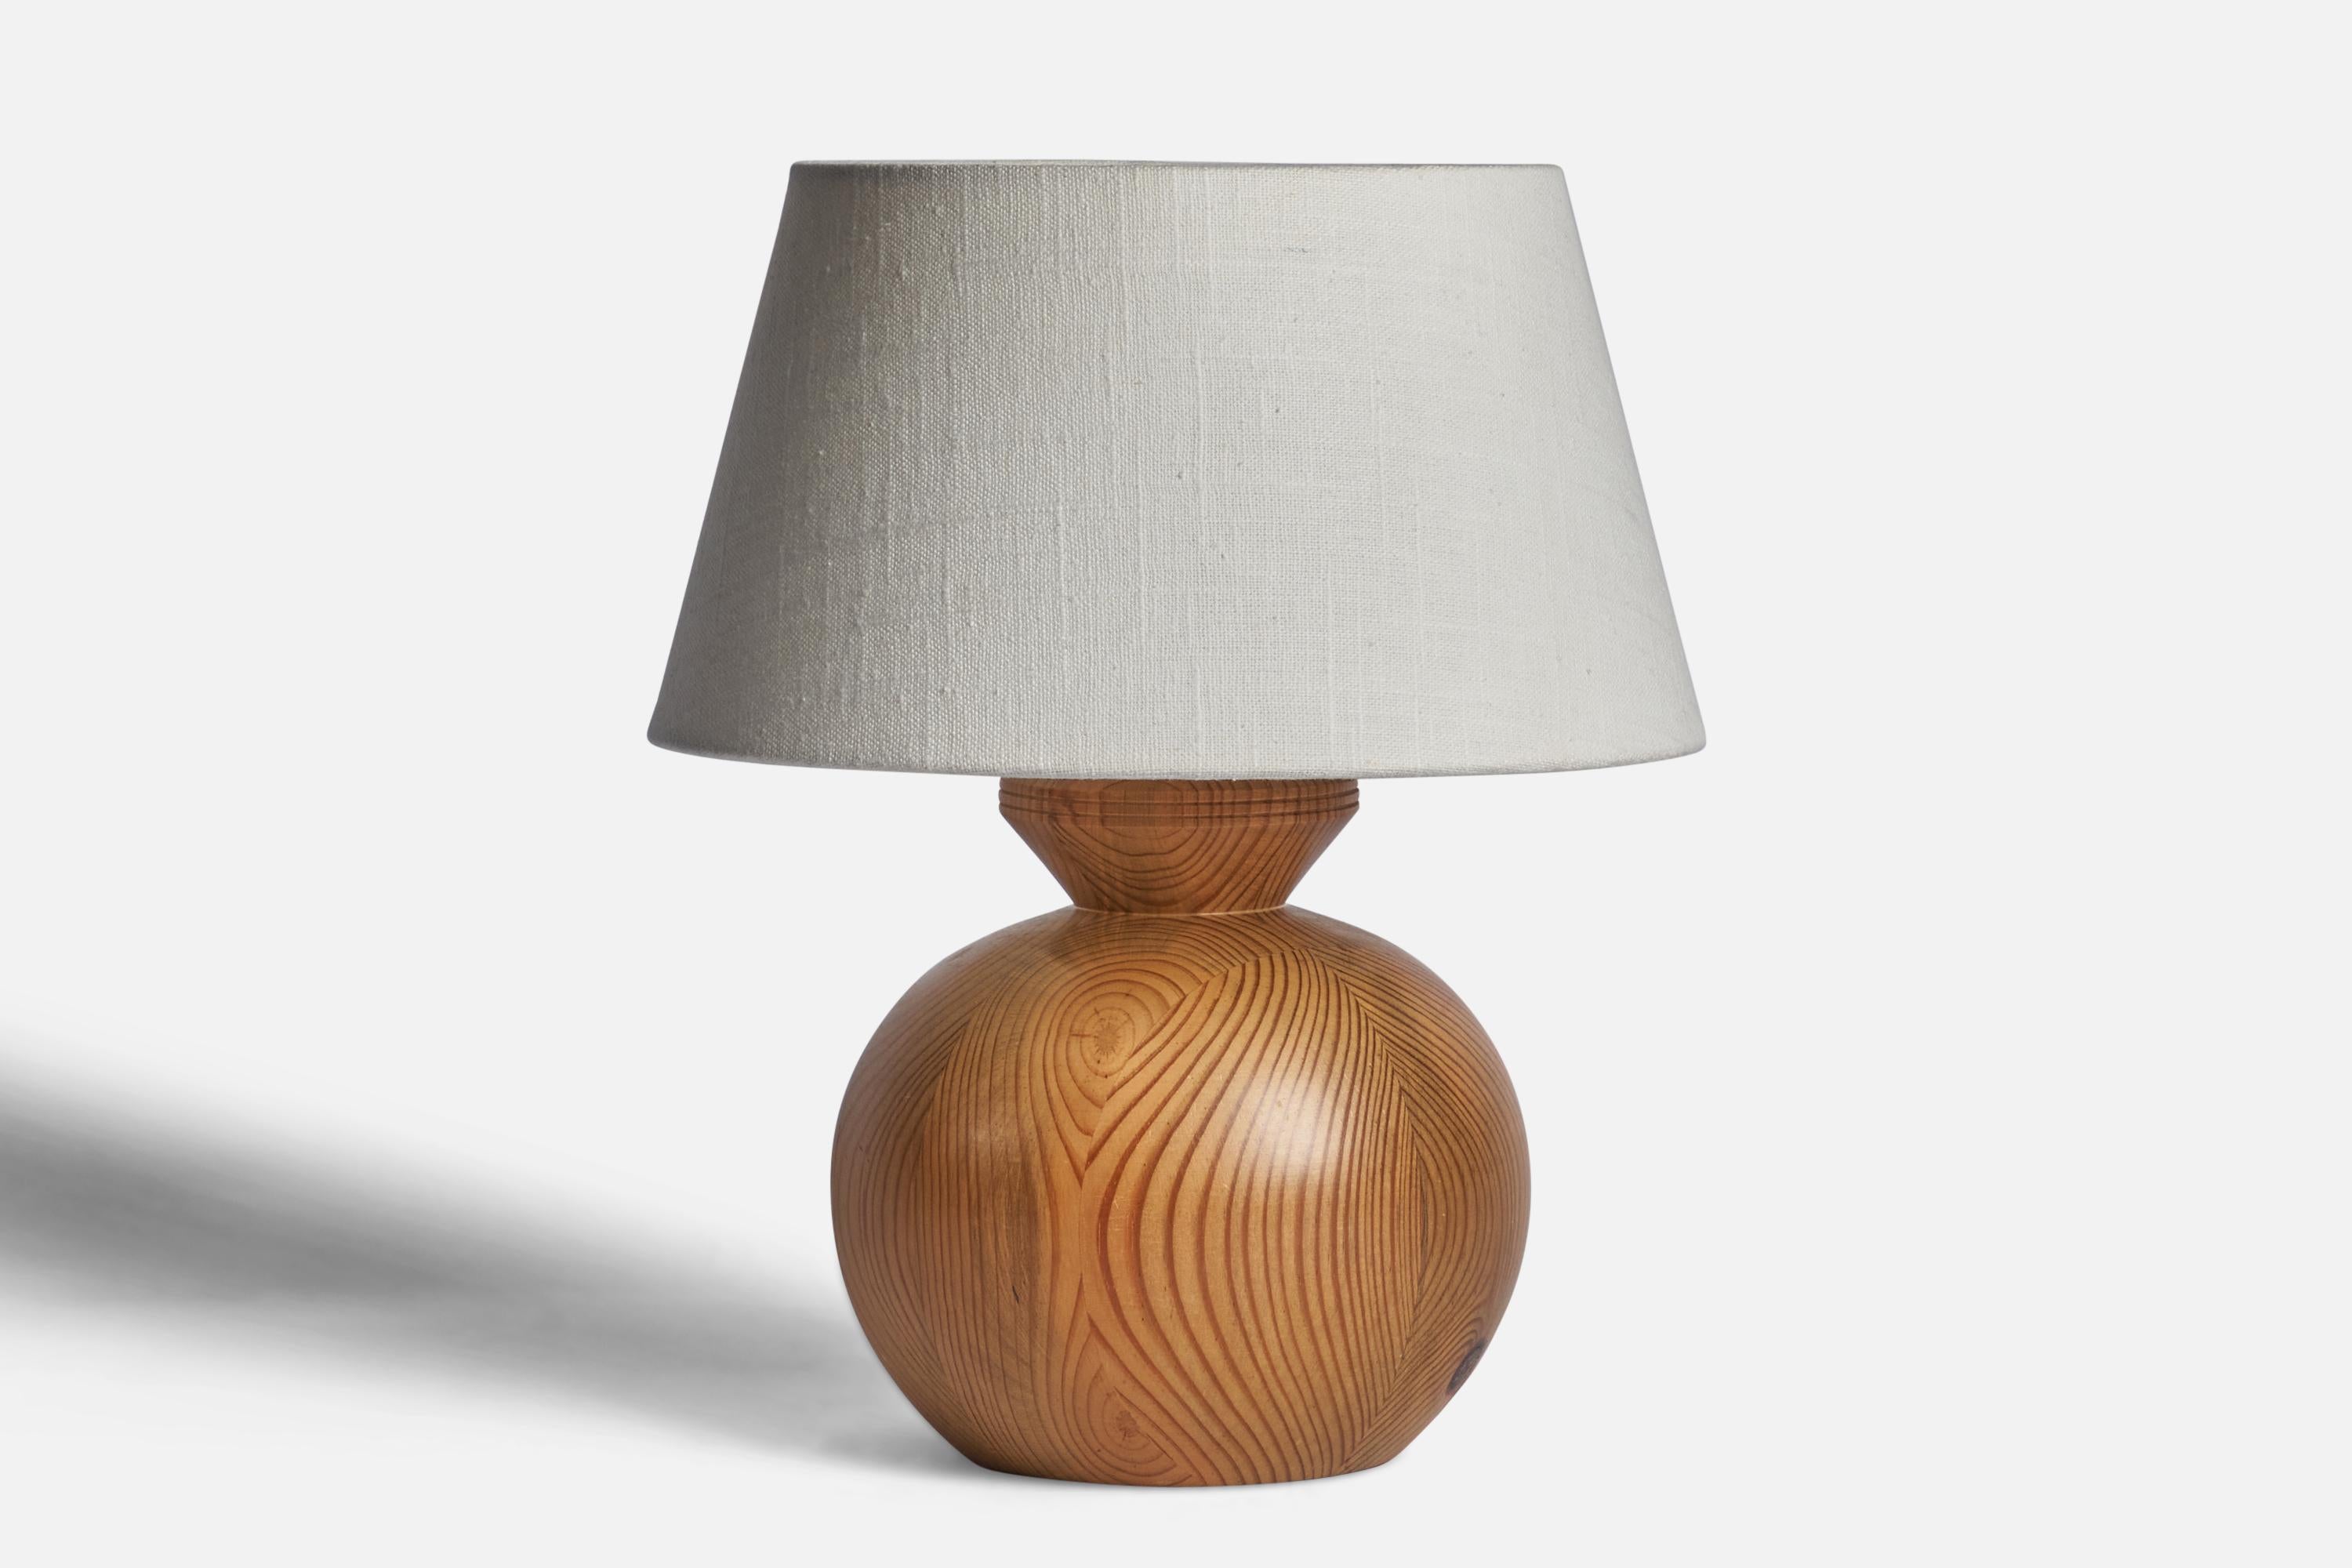 A pine table lamp designed and produced in Sweden, 1970s.

Dimensions of Lamp (inches): 9.25” H x 6.5” Diameter
Dimensions of Shade (inches): 7” Top Diameter x 10” Bottom Diameter x 5.5” H 
Dimensions of Lamp with Shade (inches): 12.45” H x